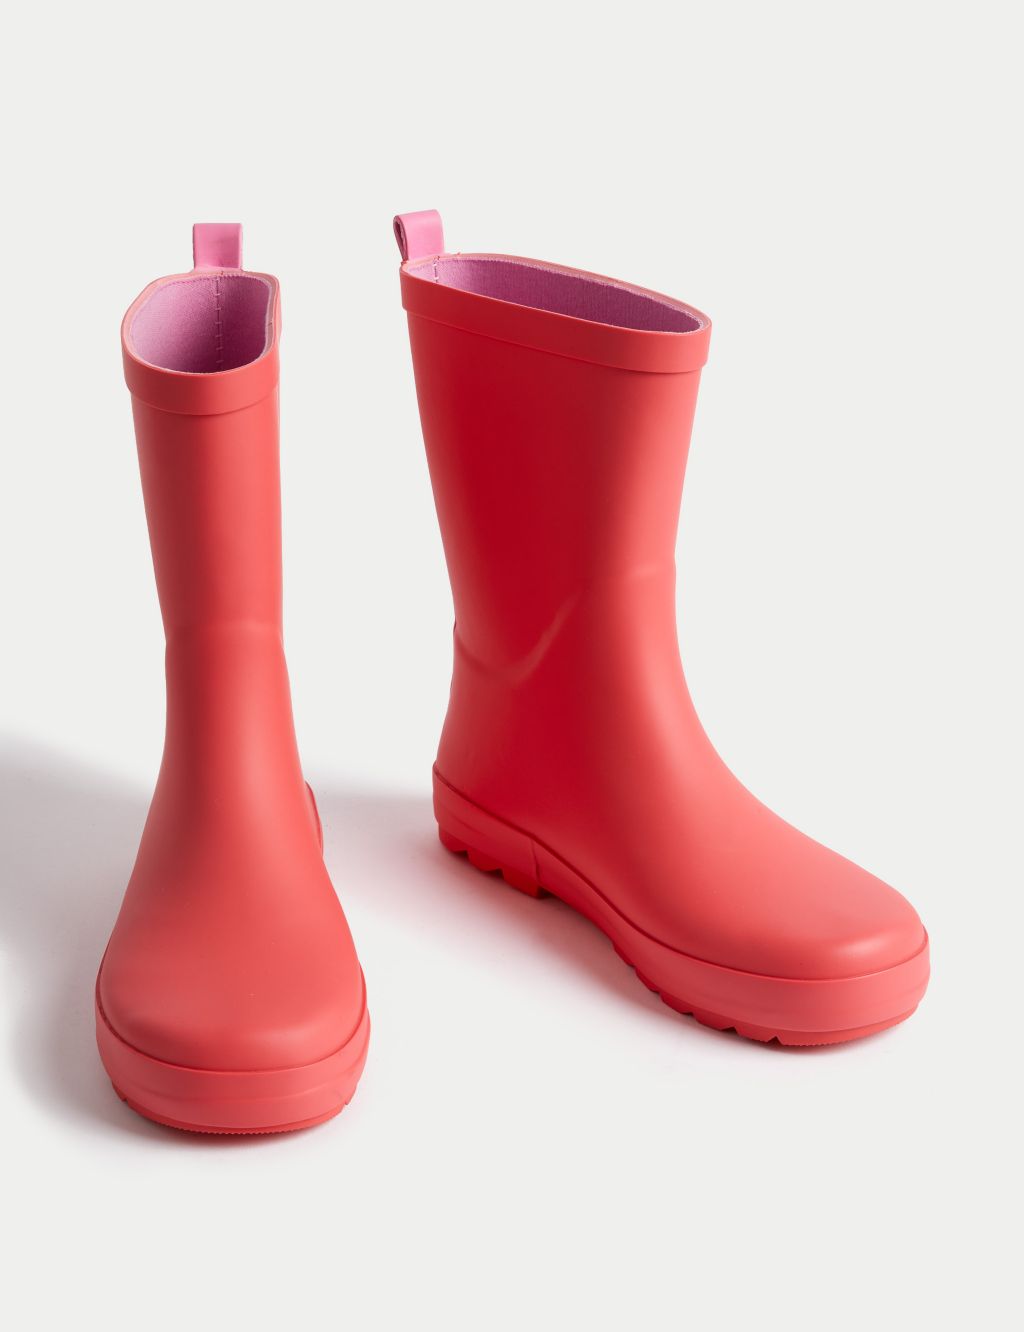 Kids' Wellies (4 Small - 6 Large) image 2